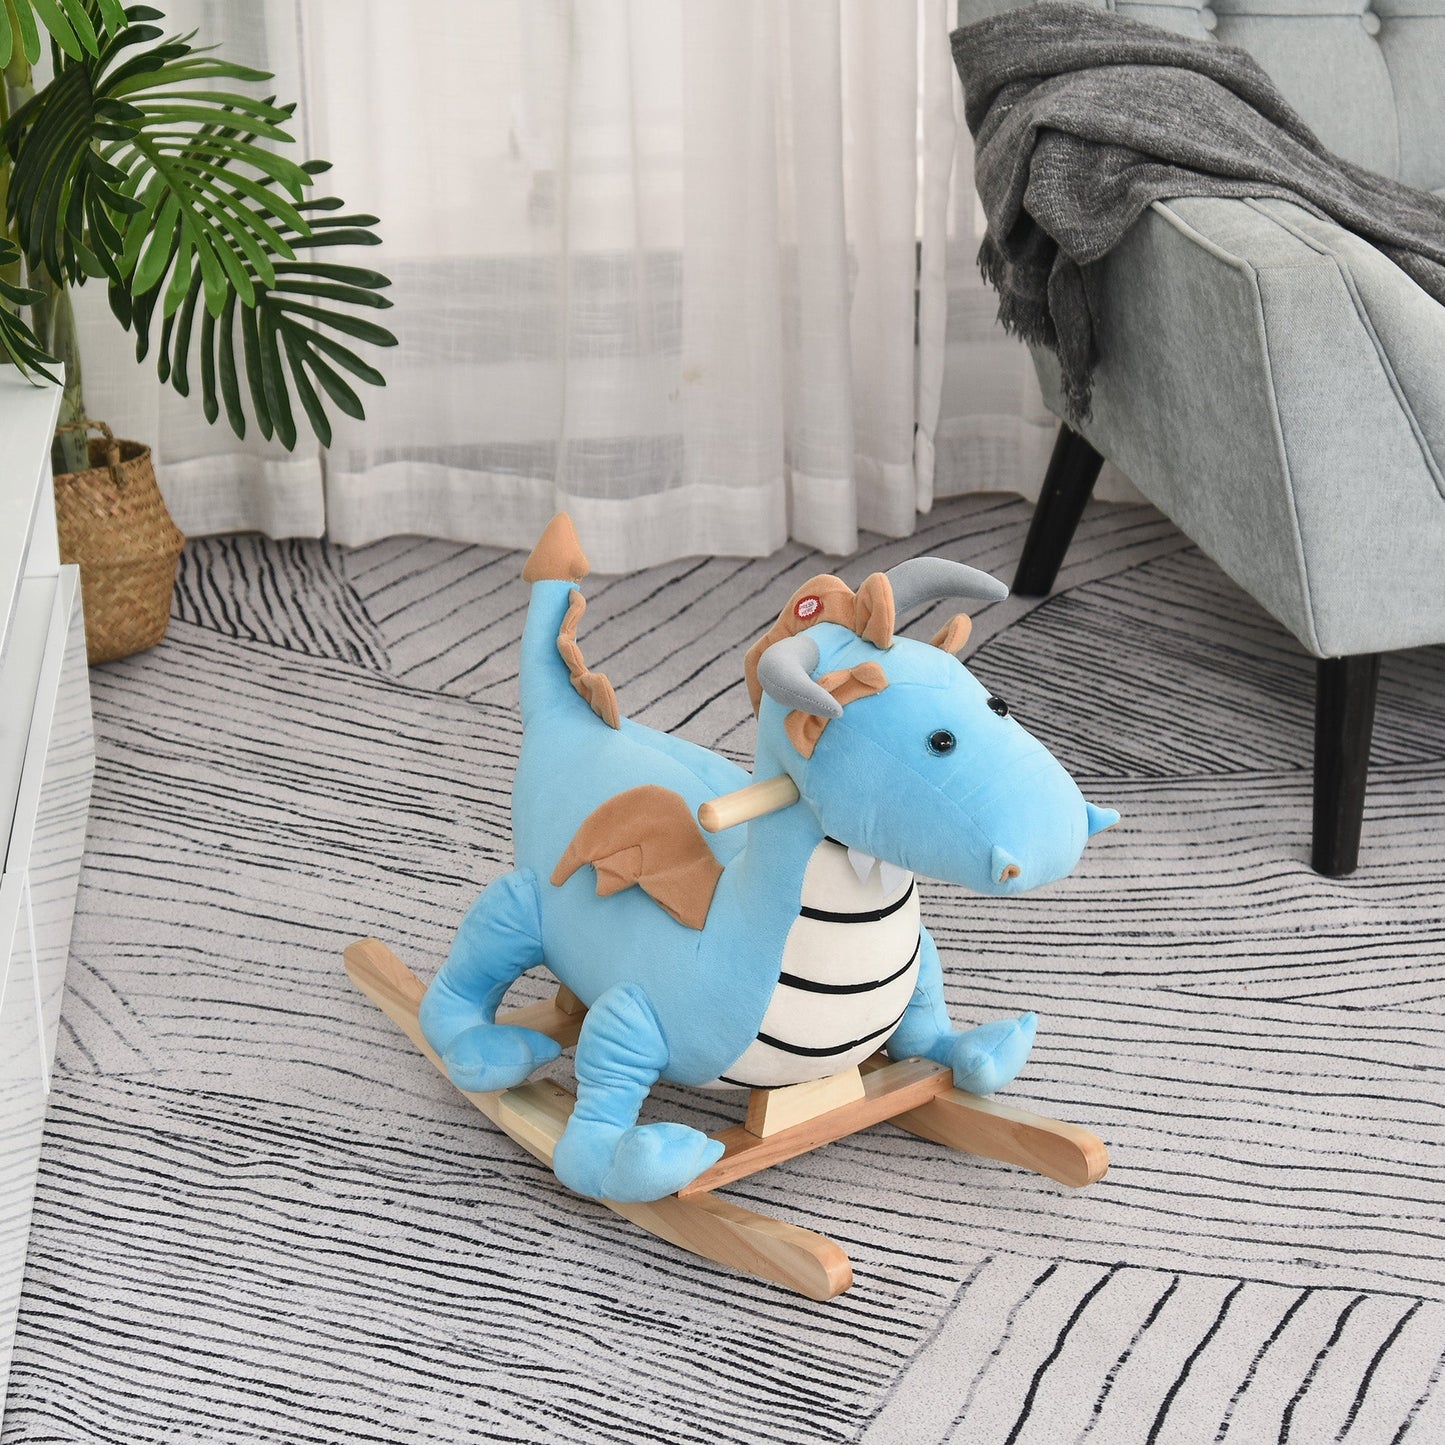 Kids Plush Ride On Rocking Horse Dinosaur Style w/ Sound Handle for 18-36 Months at Gallery Canada